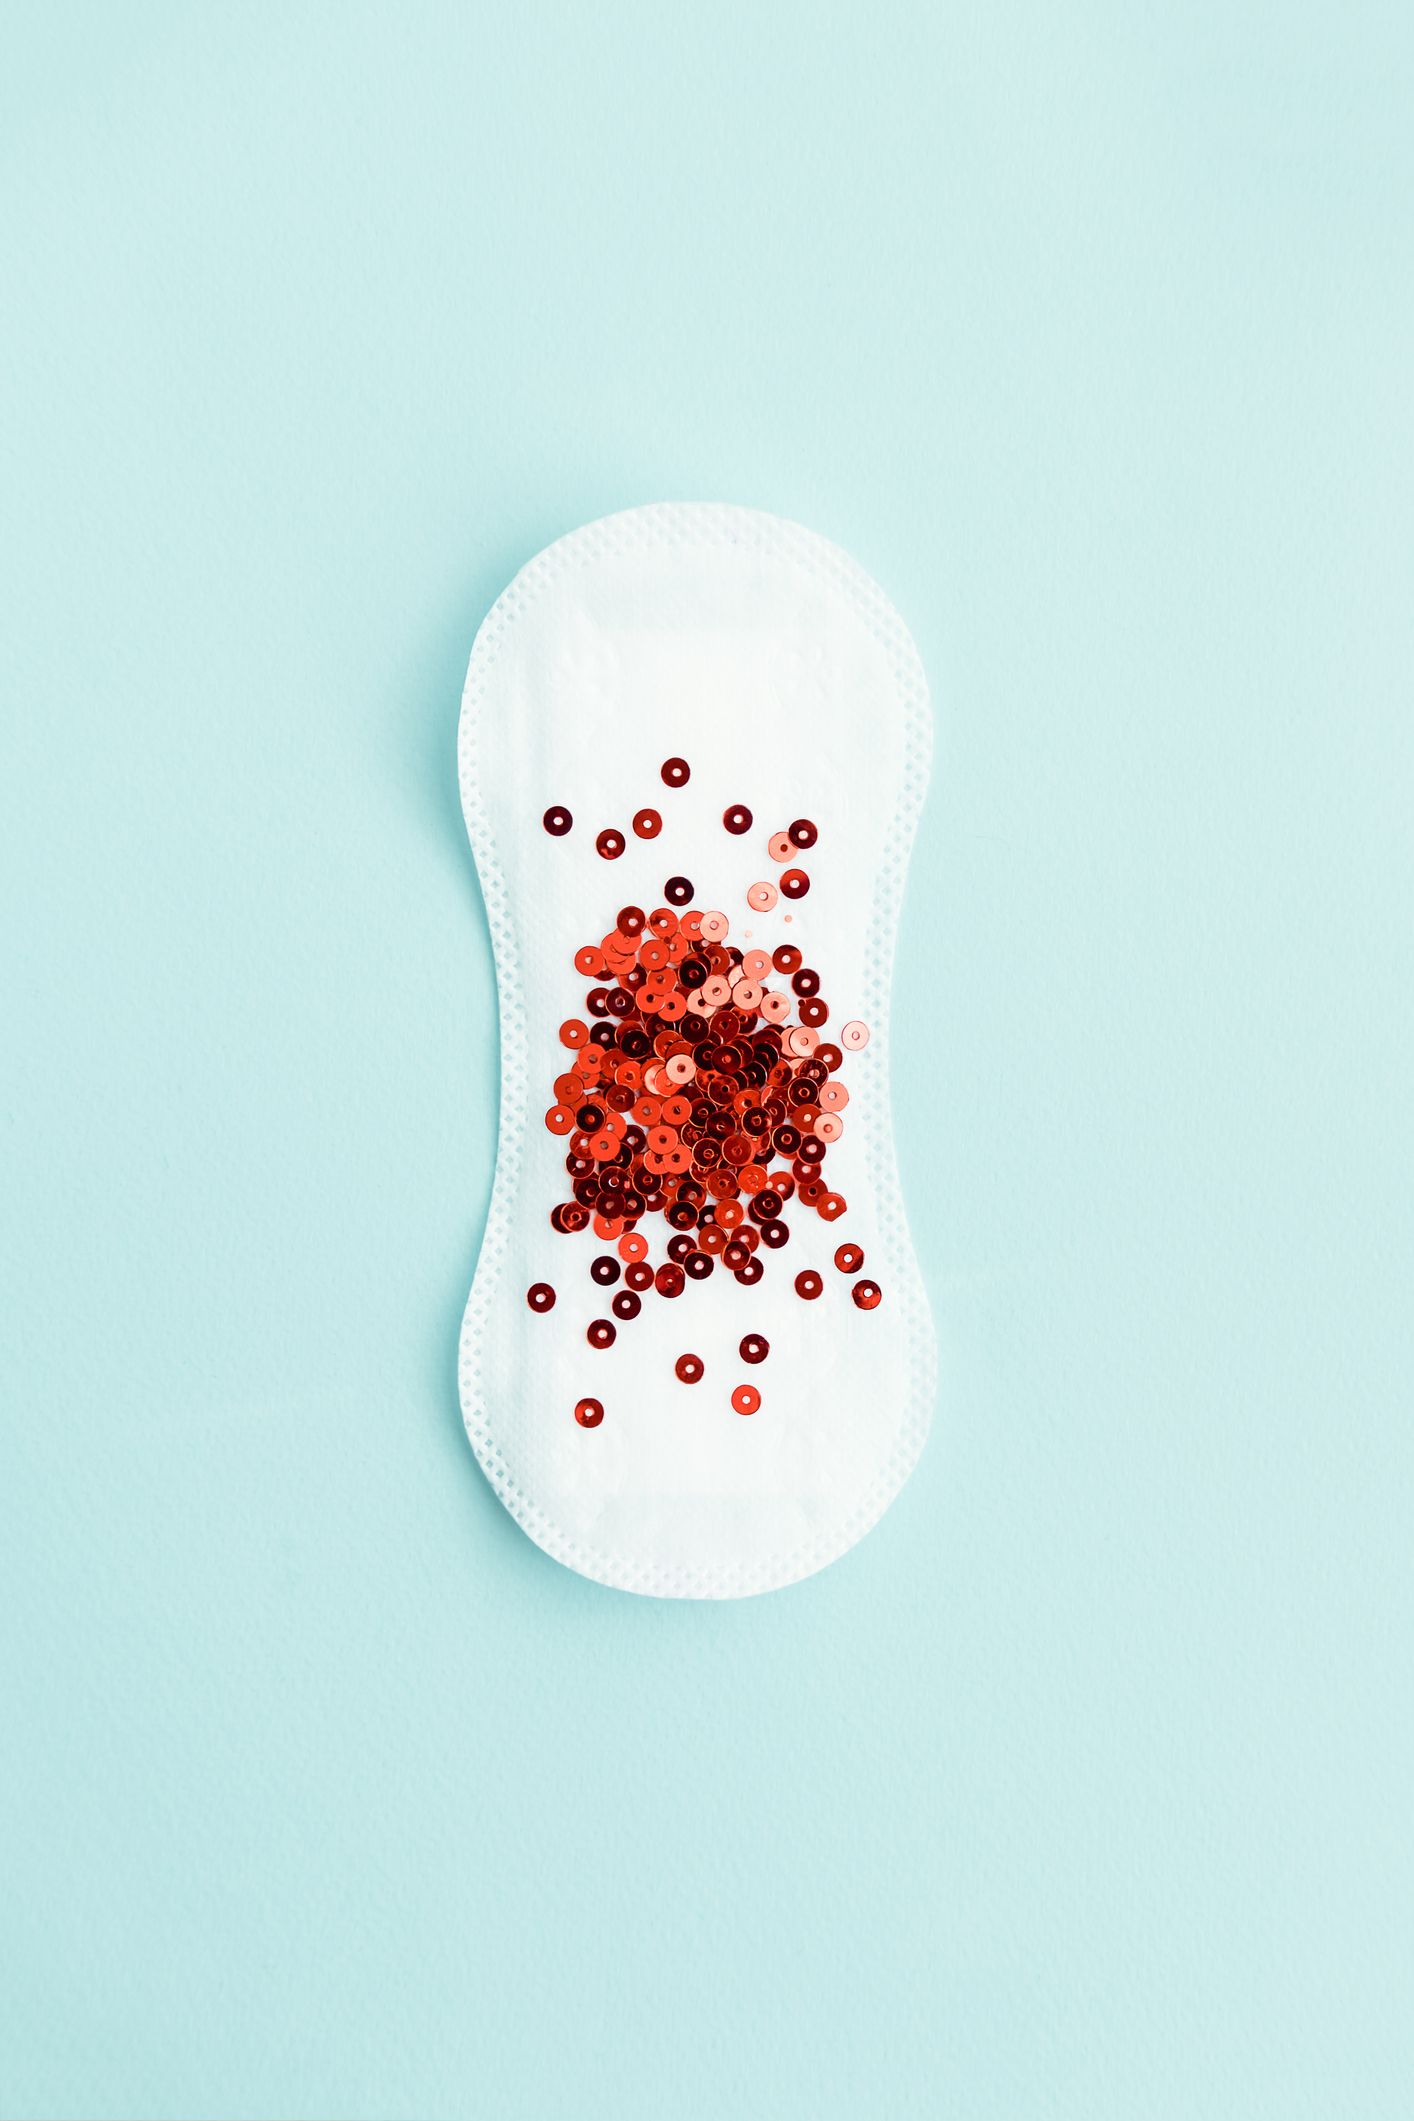 Heavy Periods with Blood Clots: Causes, Treatment and What to Expect